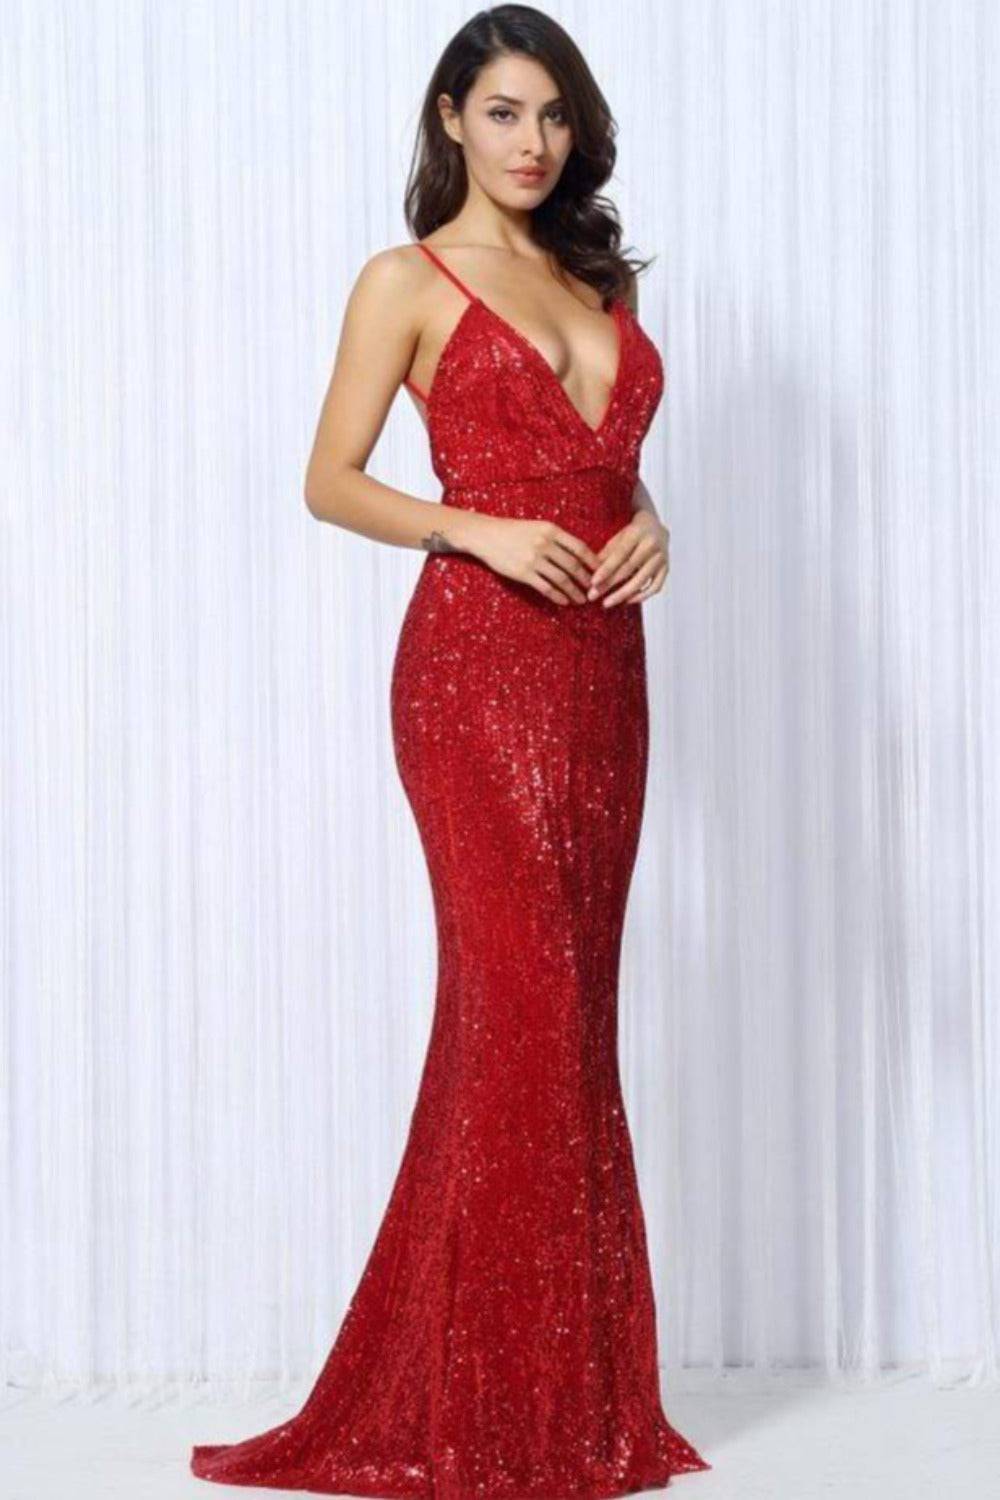 Backless Red Sequin Maxi Dress - TGC Boutique - Evening Gown